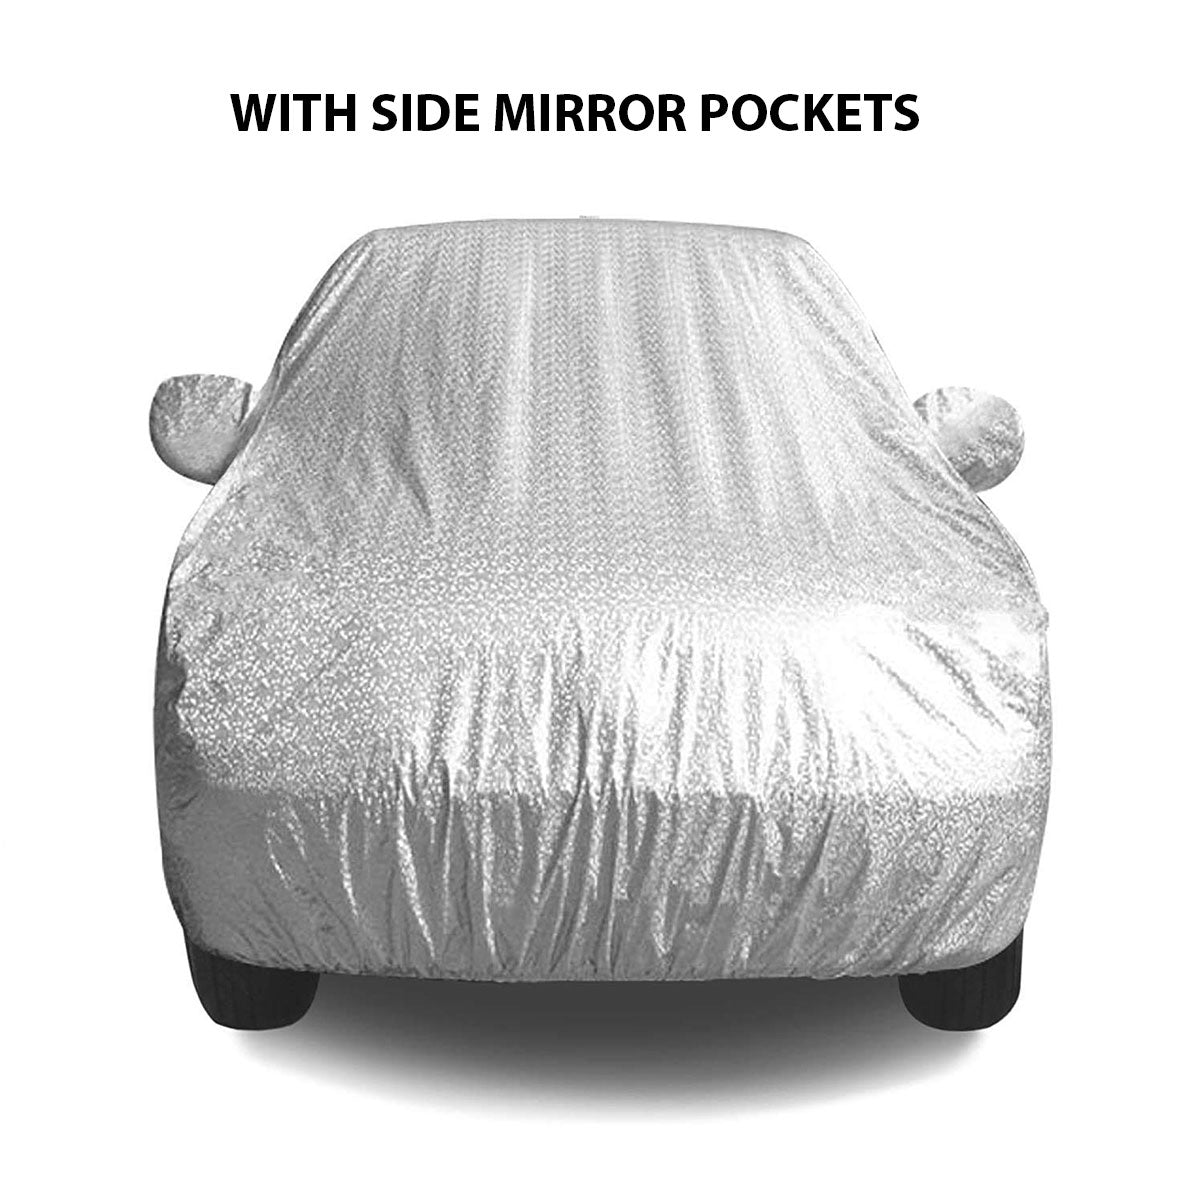 Oshotto Spyro Silver Anti Reflective, dustproof and Water Proof Car Body Cover with Mirror Pockets For Maruti Suzuki WagonR 2010-2018